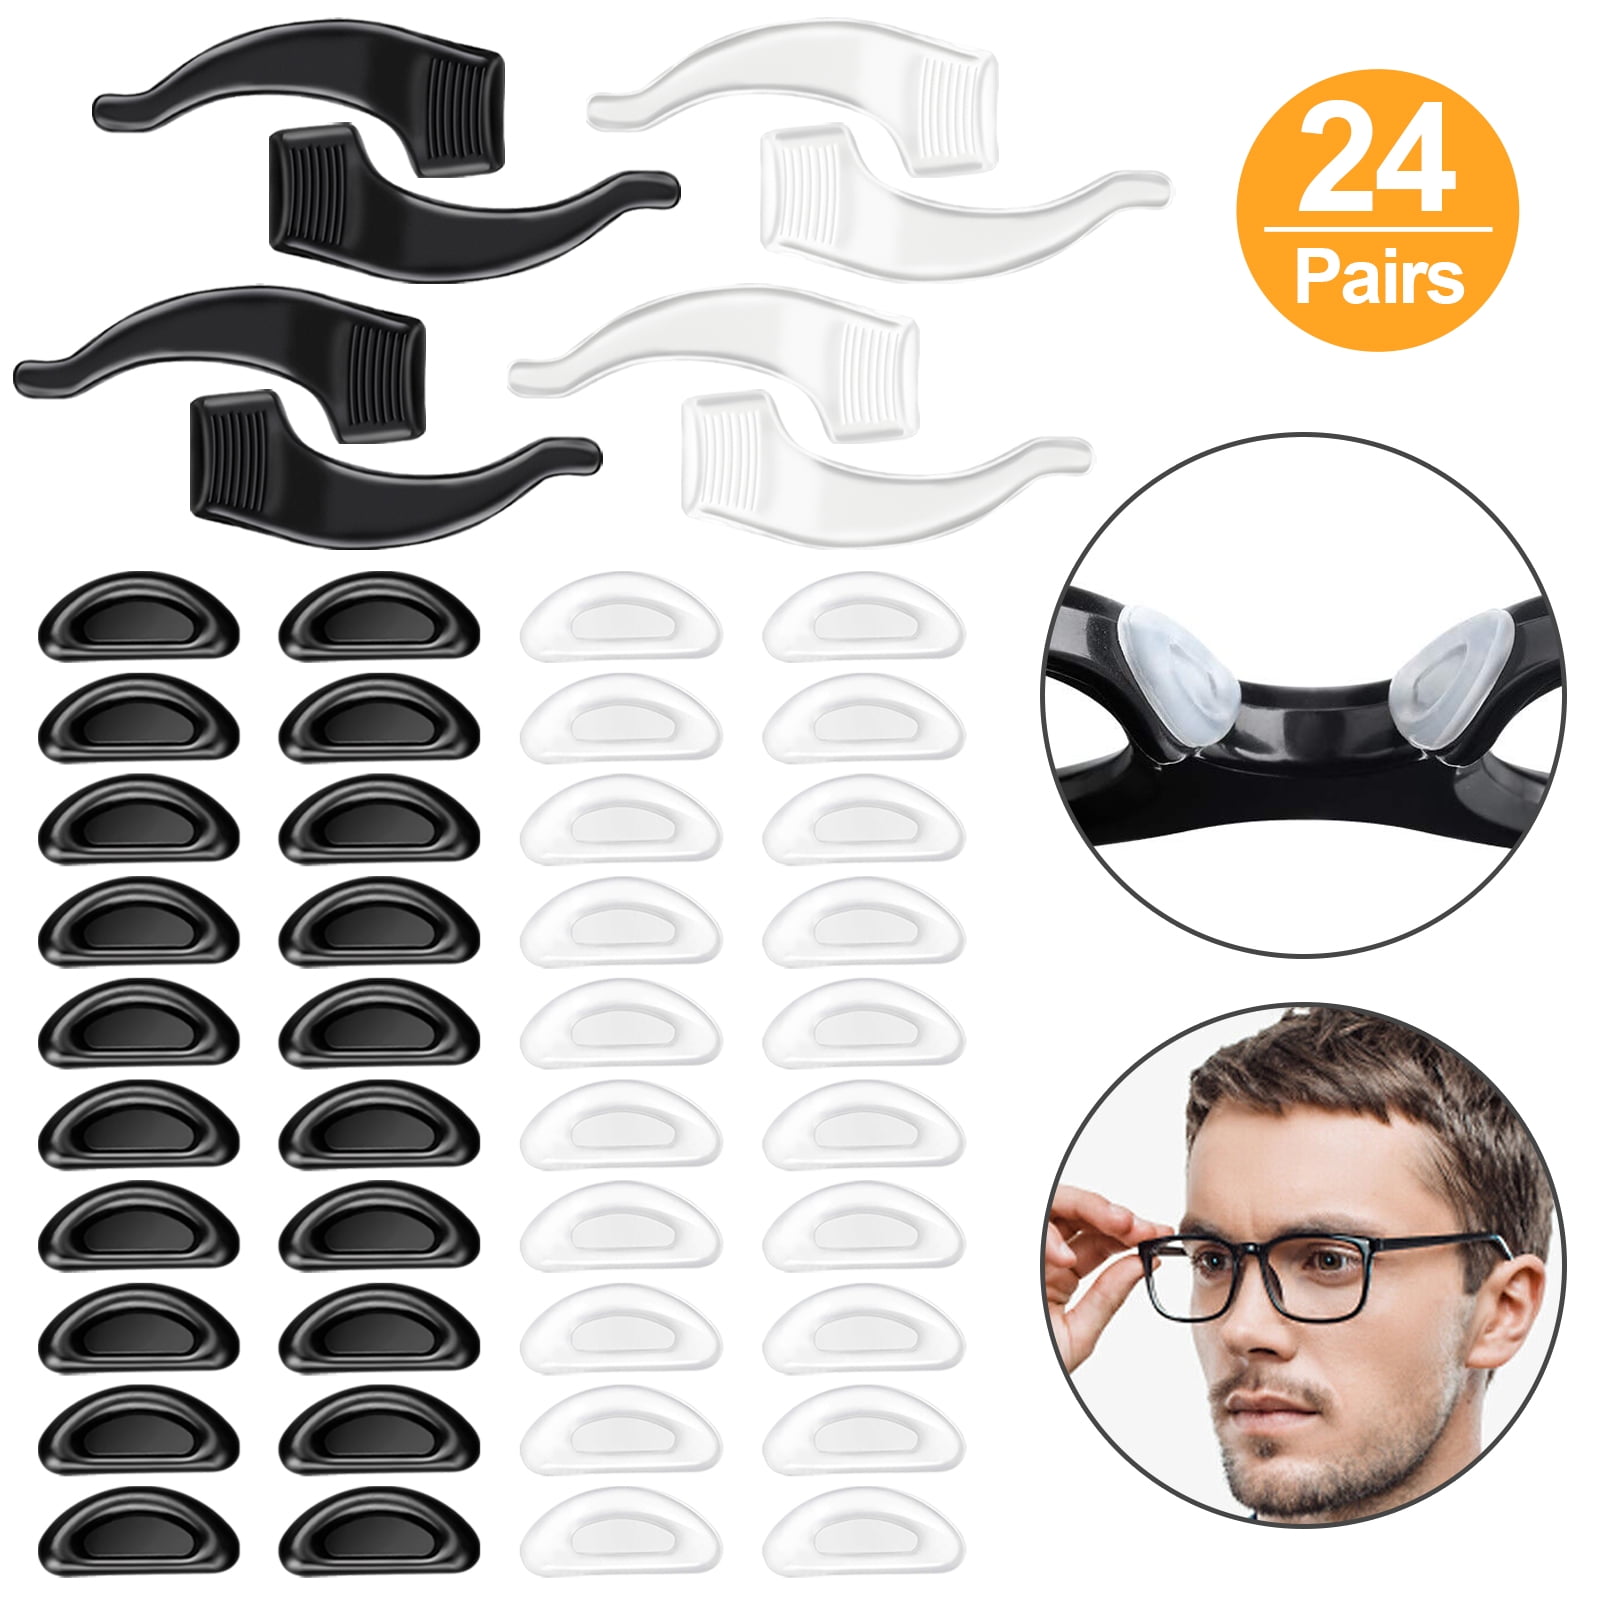 12 Pairs nerd wax Silicone Great Retainer Glasses Ear Cushion Eyeglasses